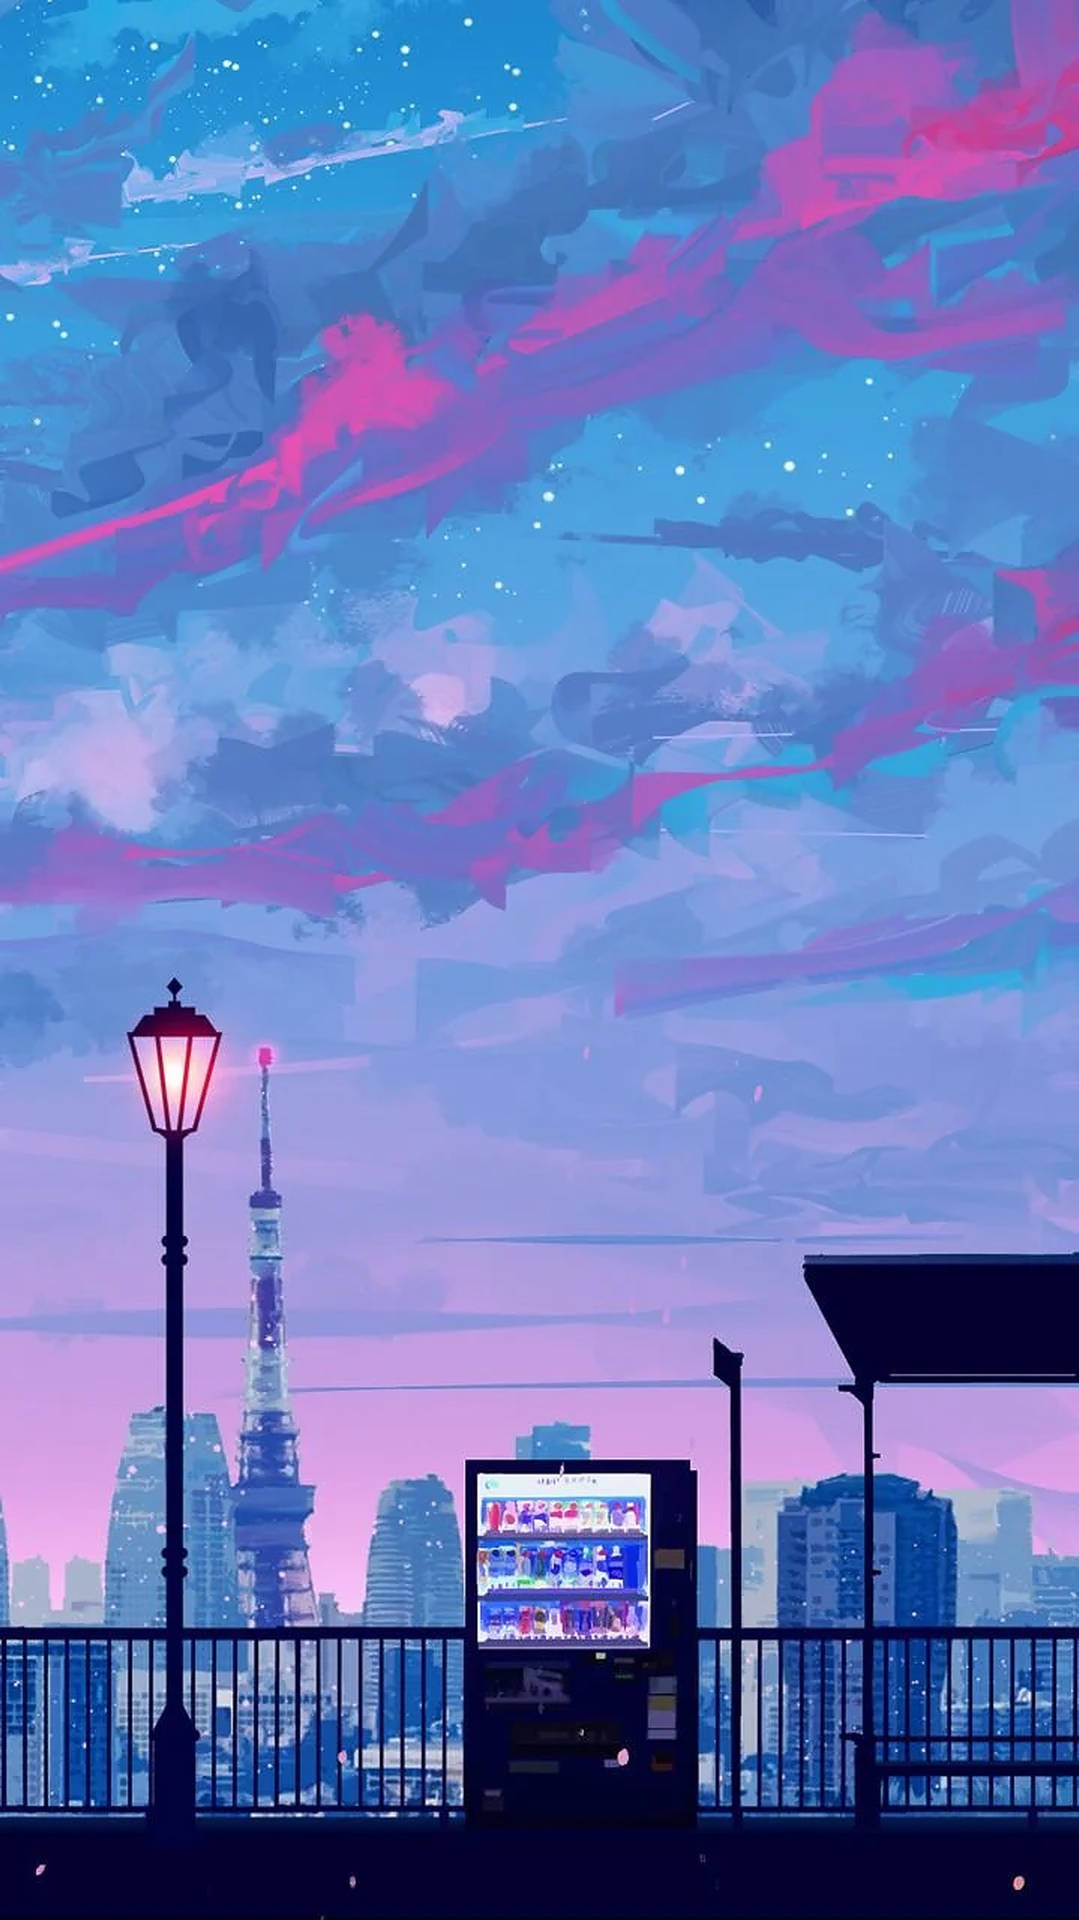 Download Anime City Iphone Aesthetic Wallpaper 